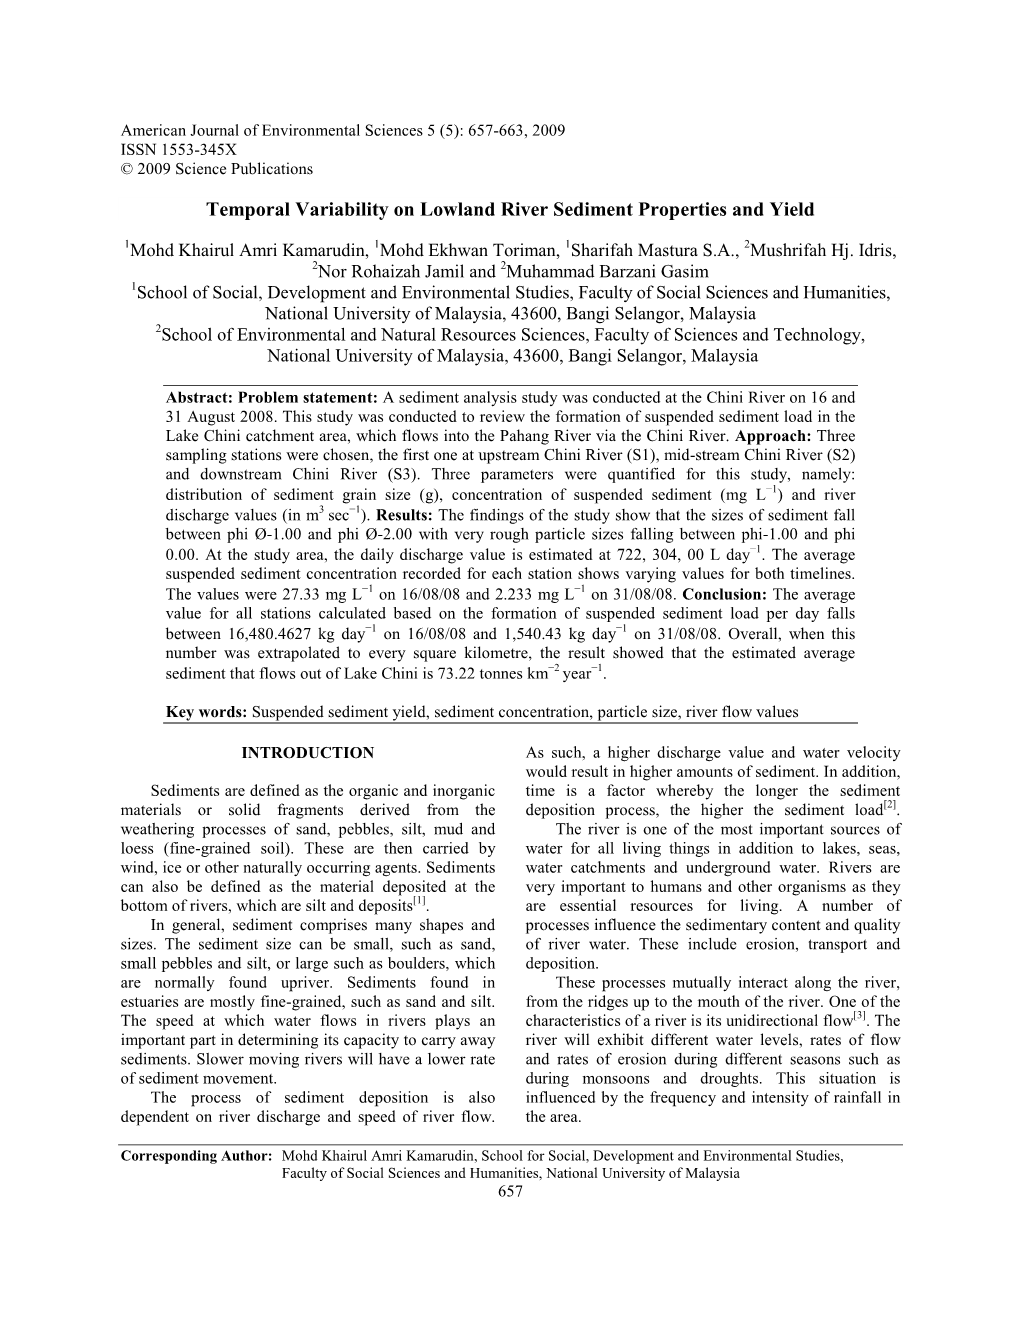 Temporal Variability on Lowland River Sediment Properties and Yield